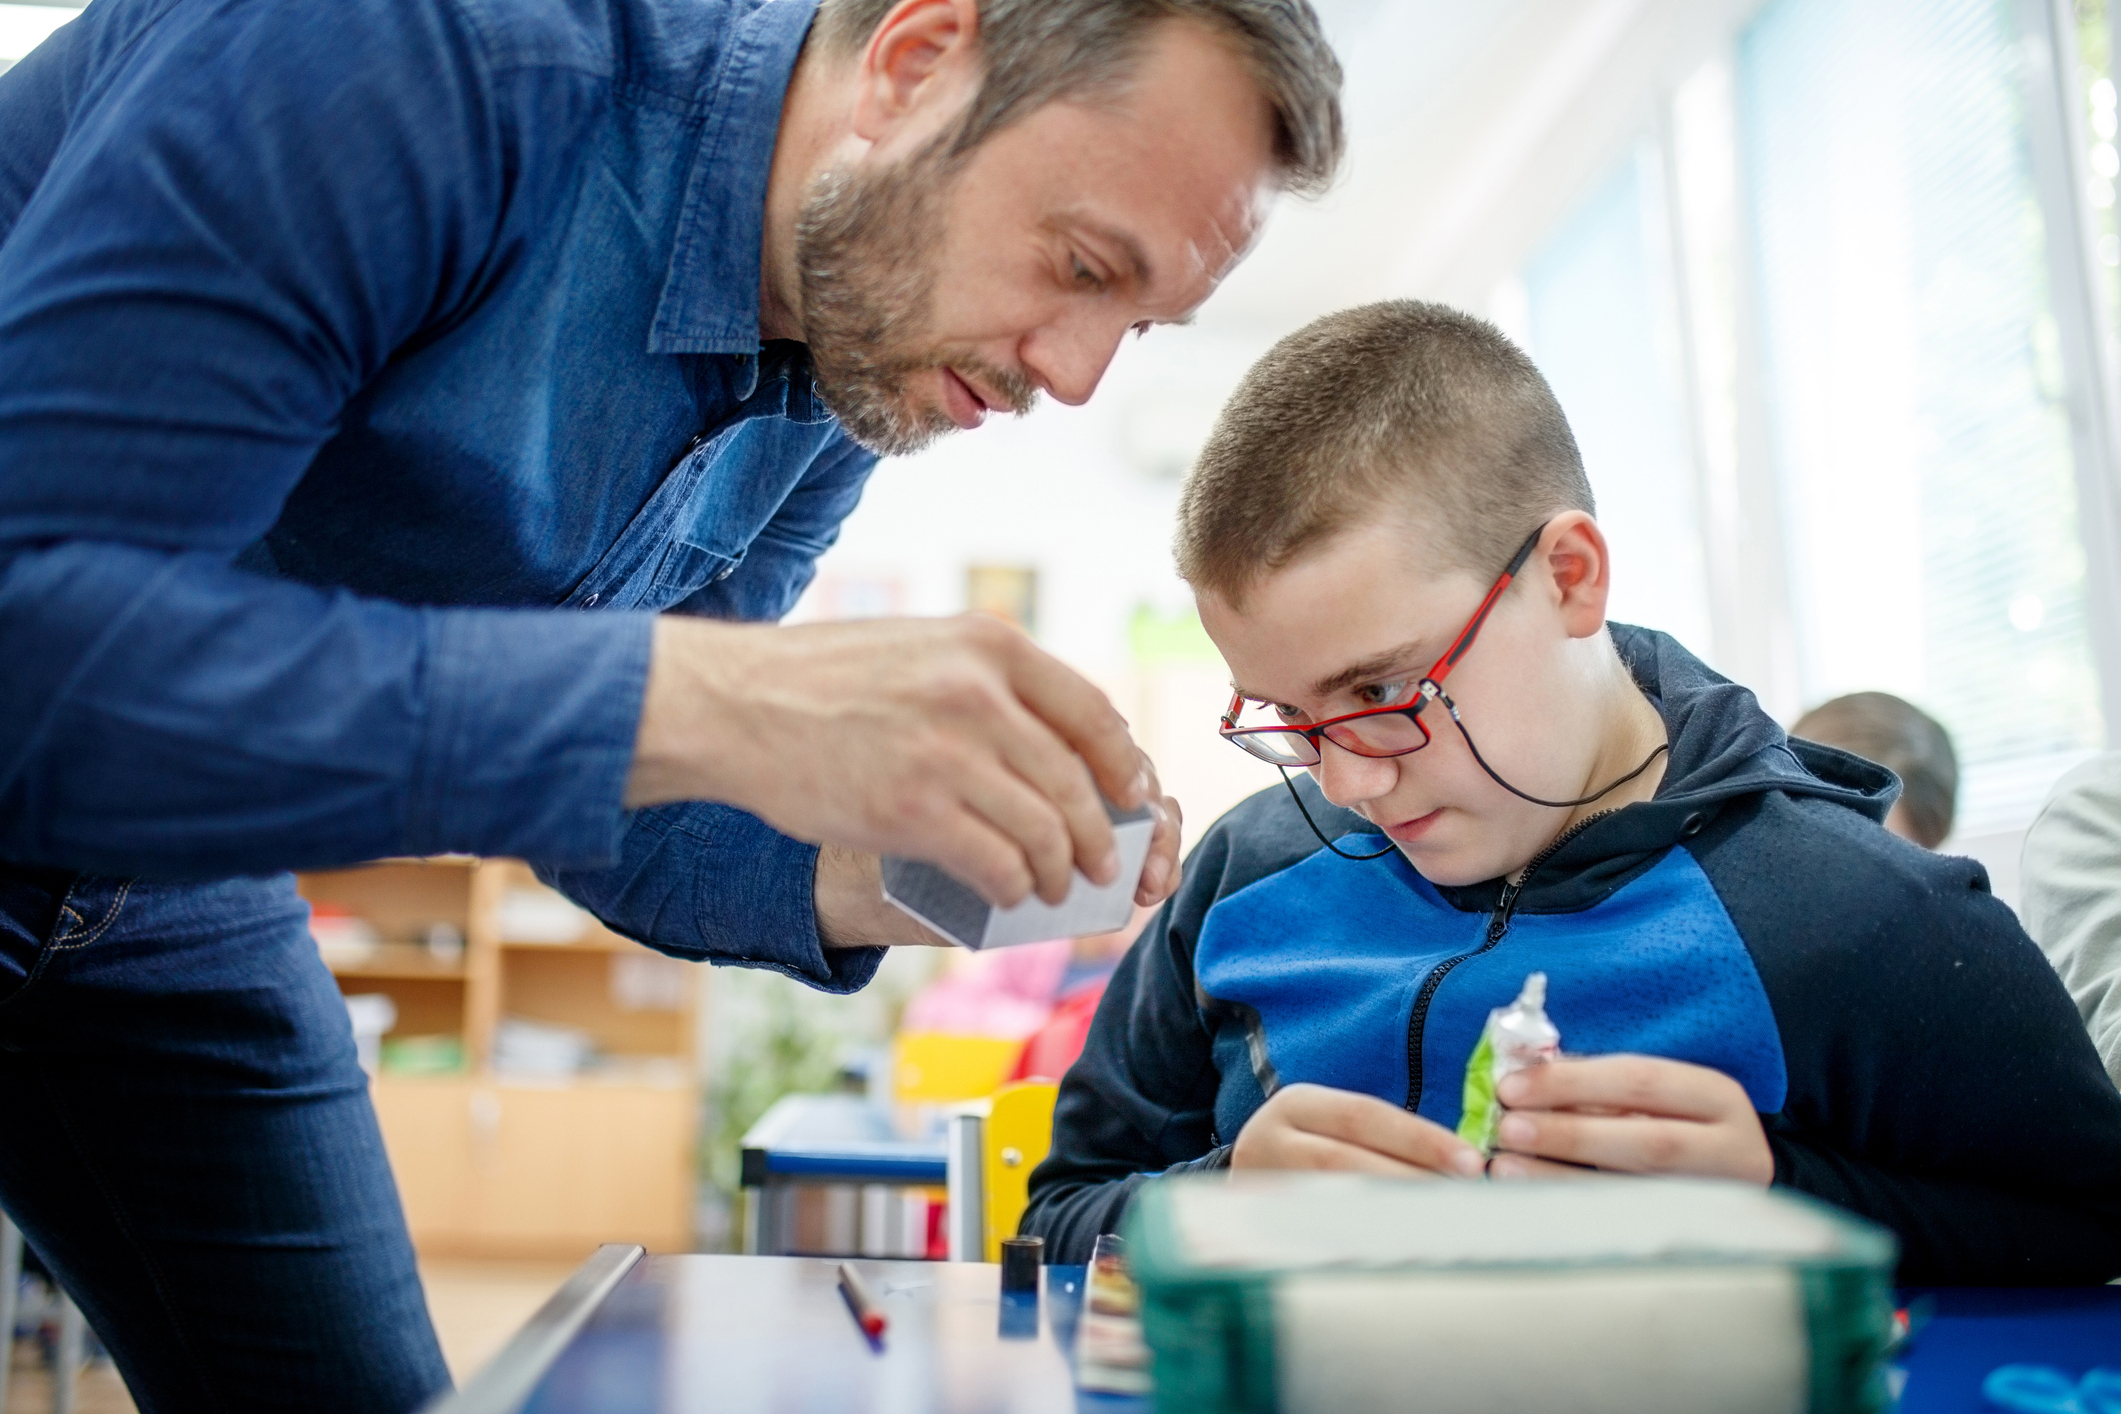 How to Become a Special Education Teacher